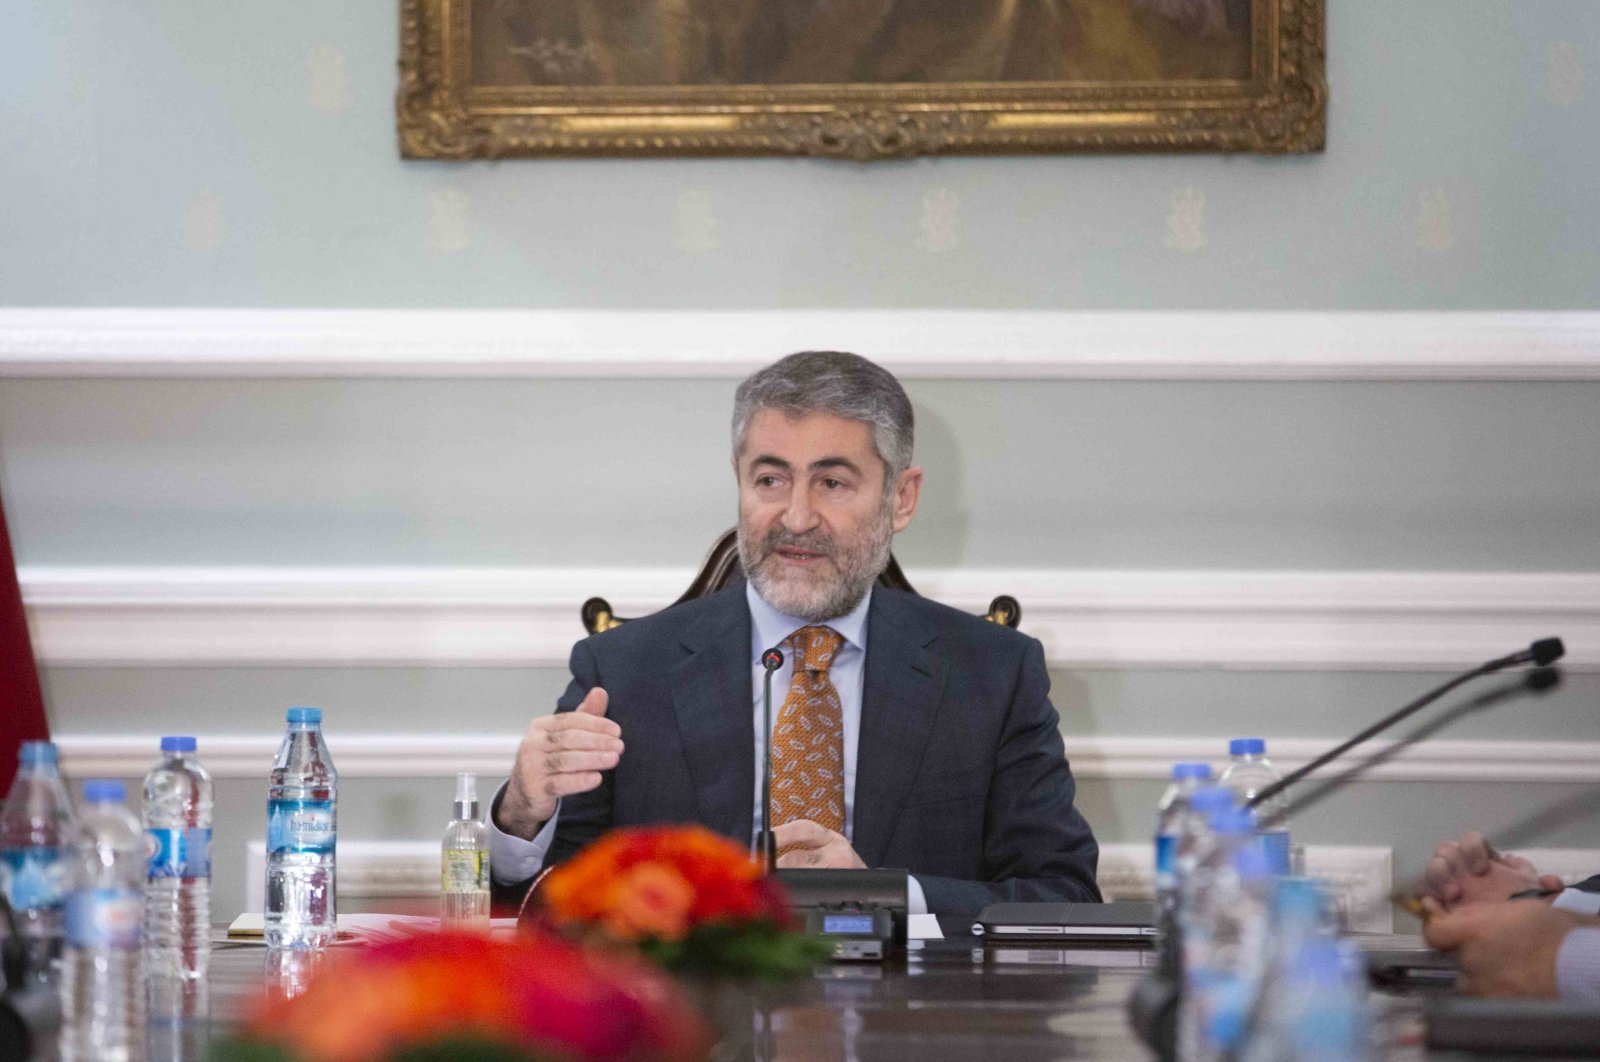 Treasury and Finance Minister Nureddin Nebati during a meeting with press members after talks with investors and executives in London, United Kingdom, Feb. 8, 2022. (AA Photo)